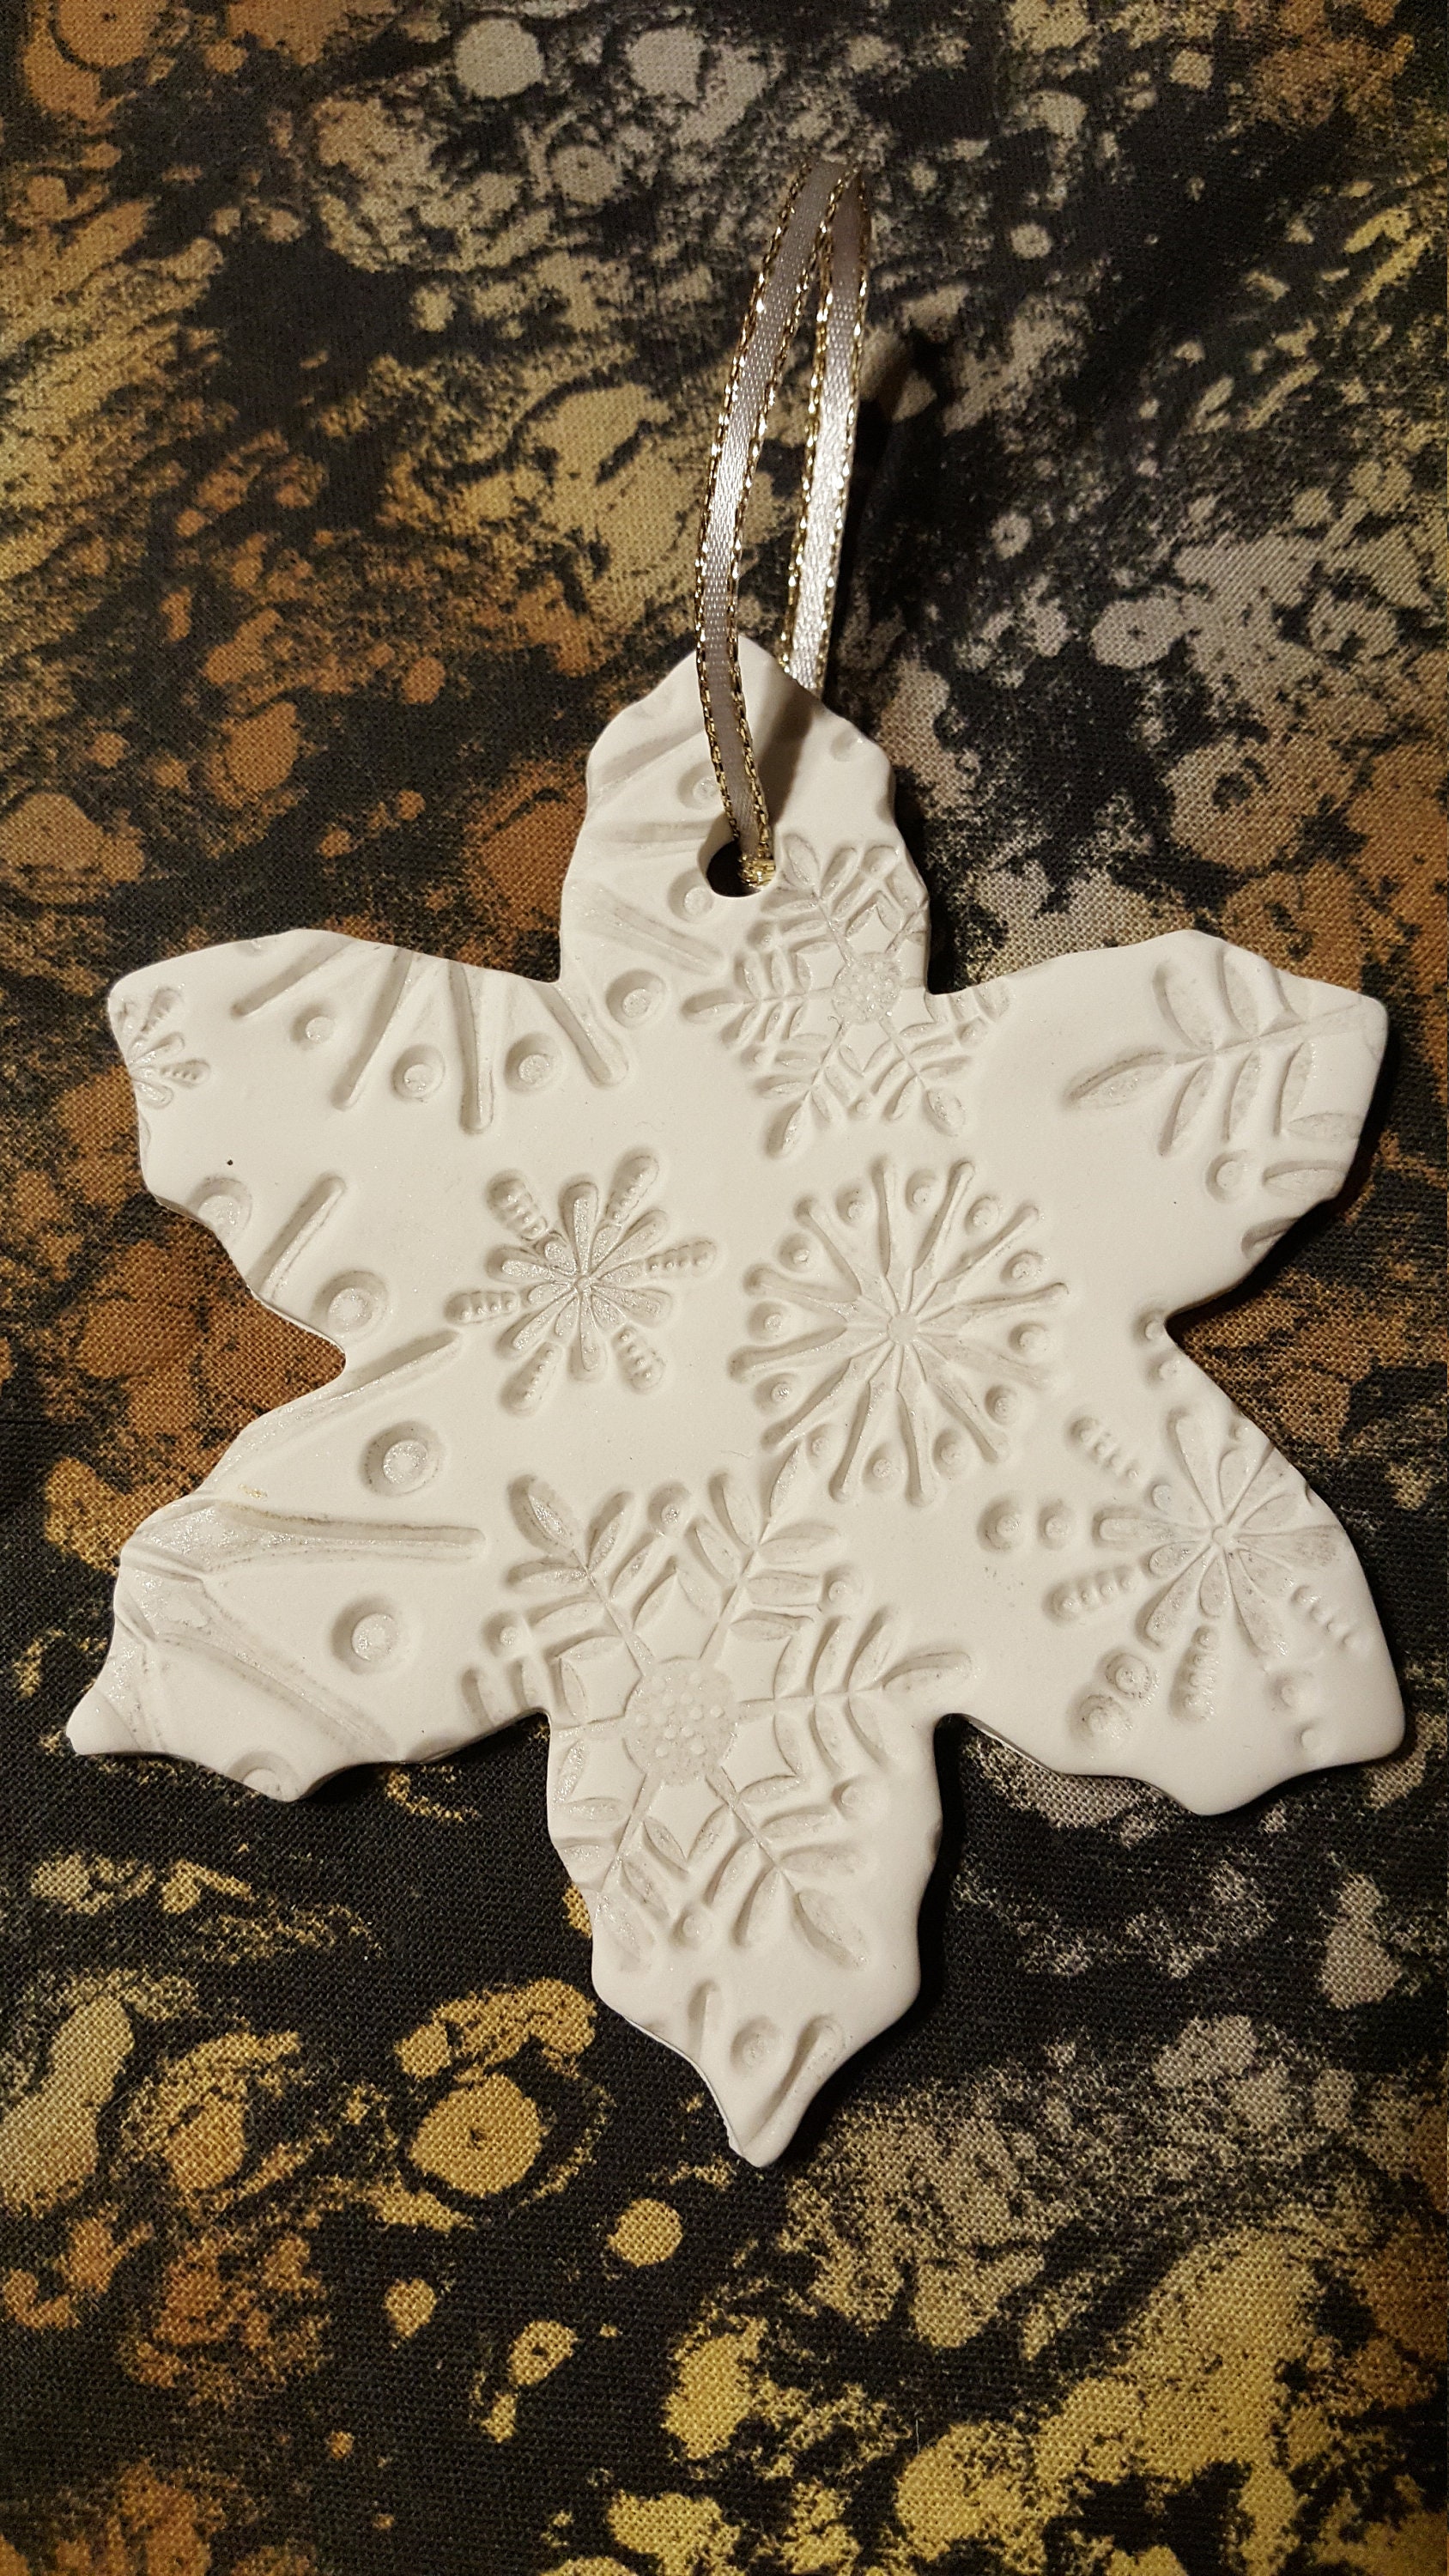 3t hand sculpted polymer clay snowgirl with snowflake red dress # ornament